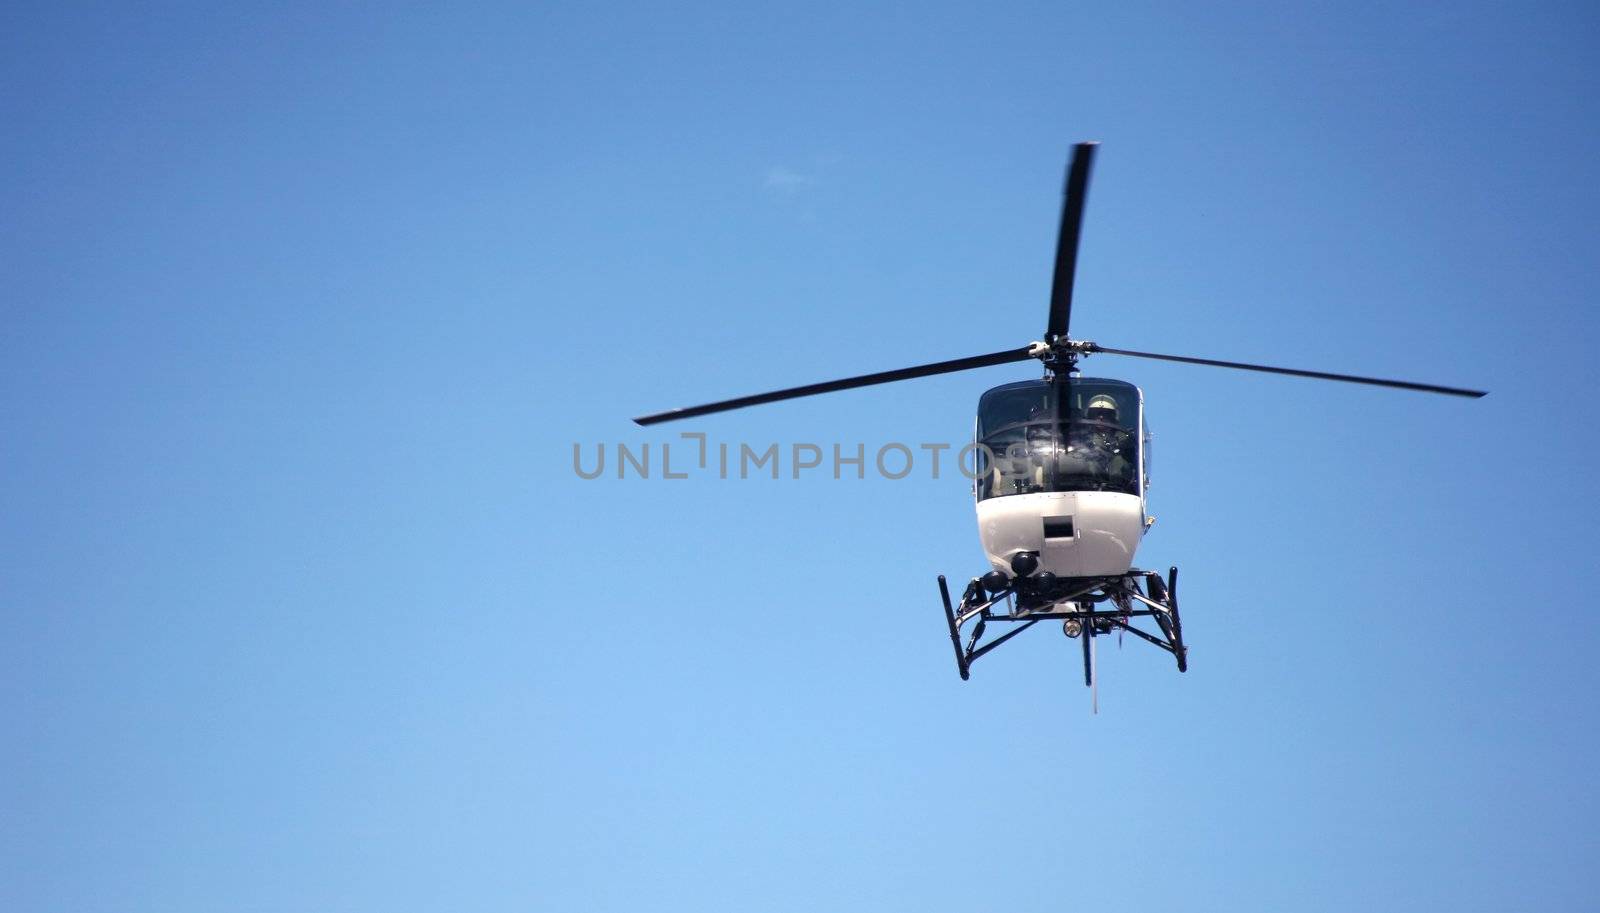 One police helicopter flying in the blue sky with blade motion visible